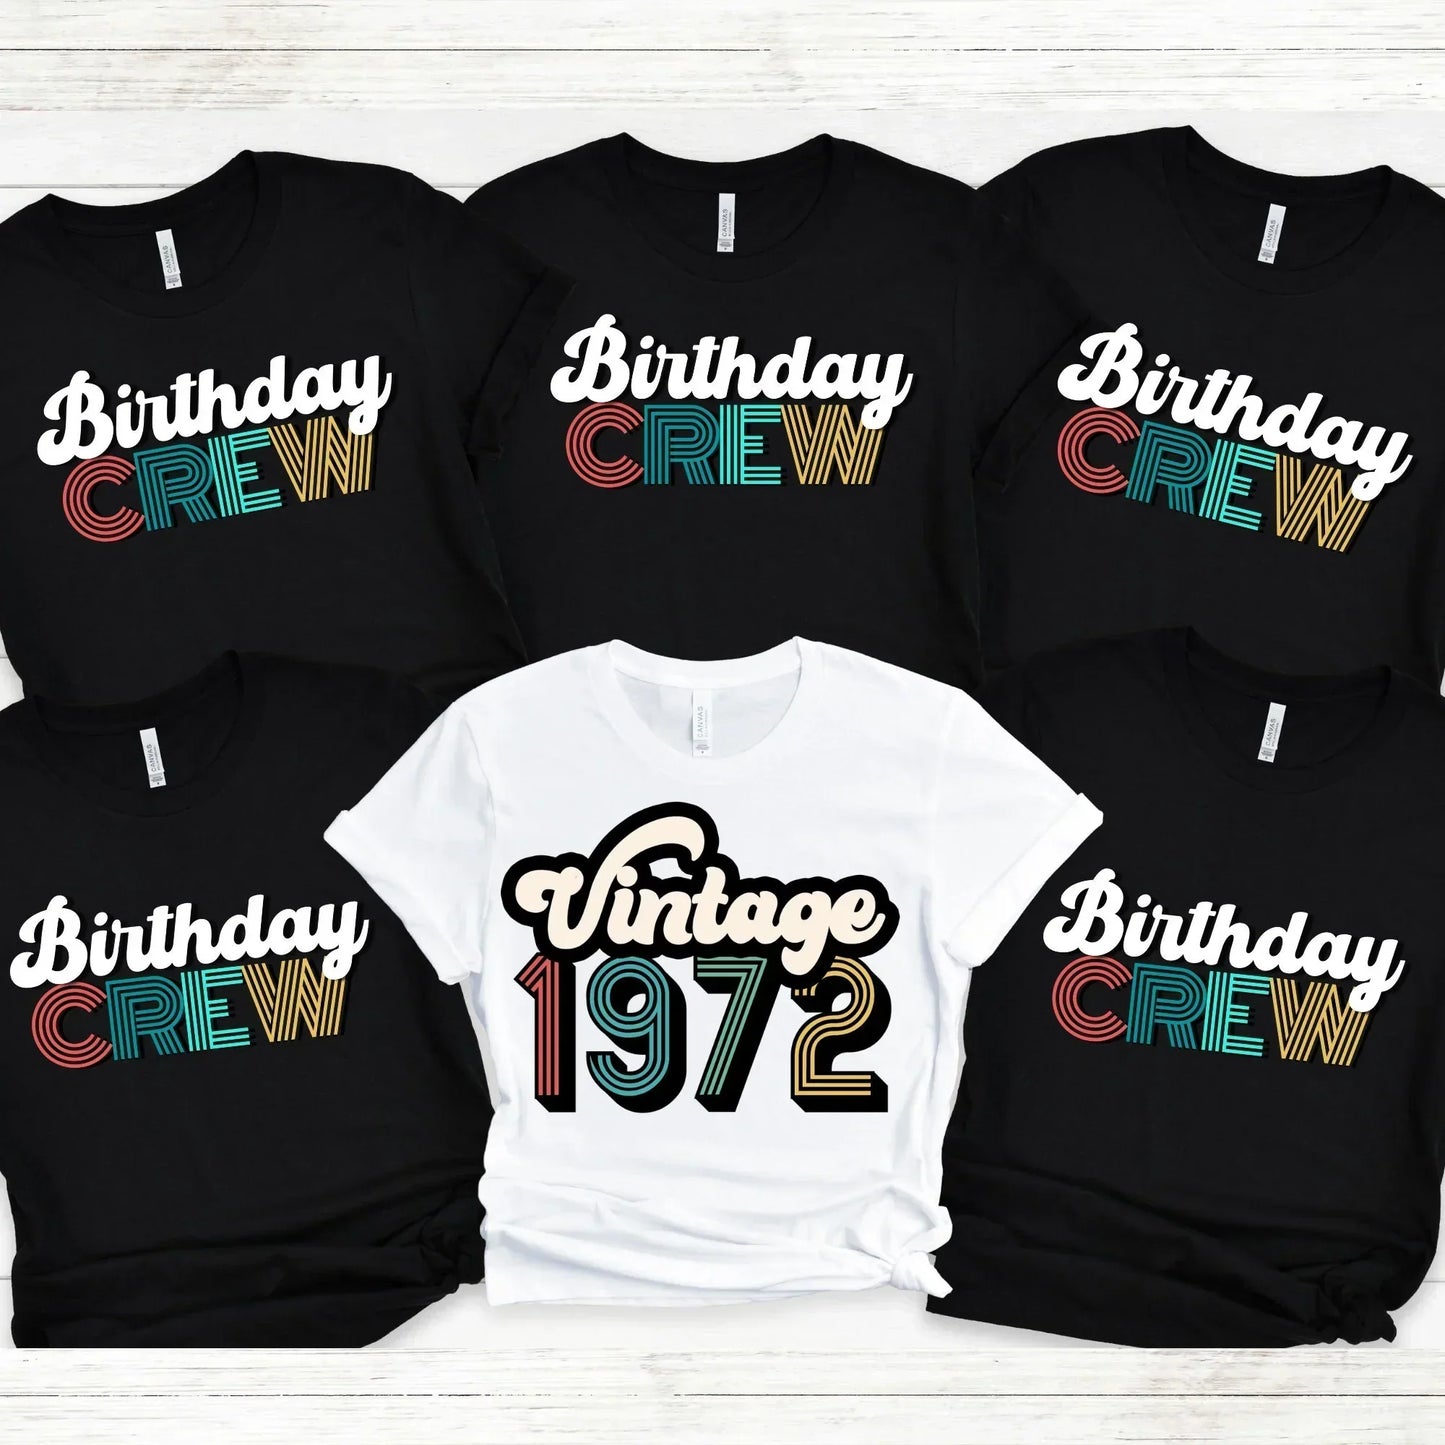 Vintage 1972, 50th Birthday Group Shirt, Birthday Crew, Birthday Squad, 50th Gift for Him, Birthday Gift, Birthday Party Tees, Gift for Him HMDesignStudioUS